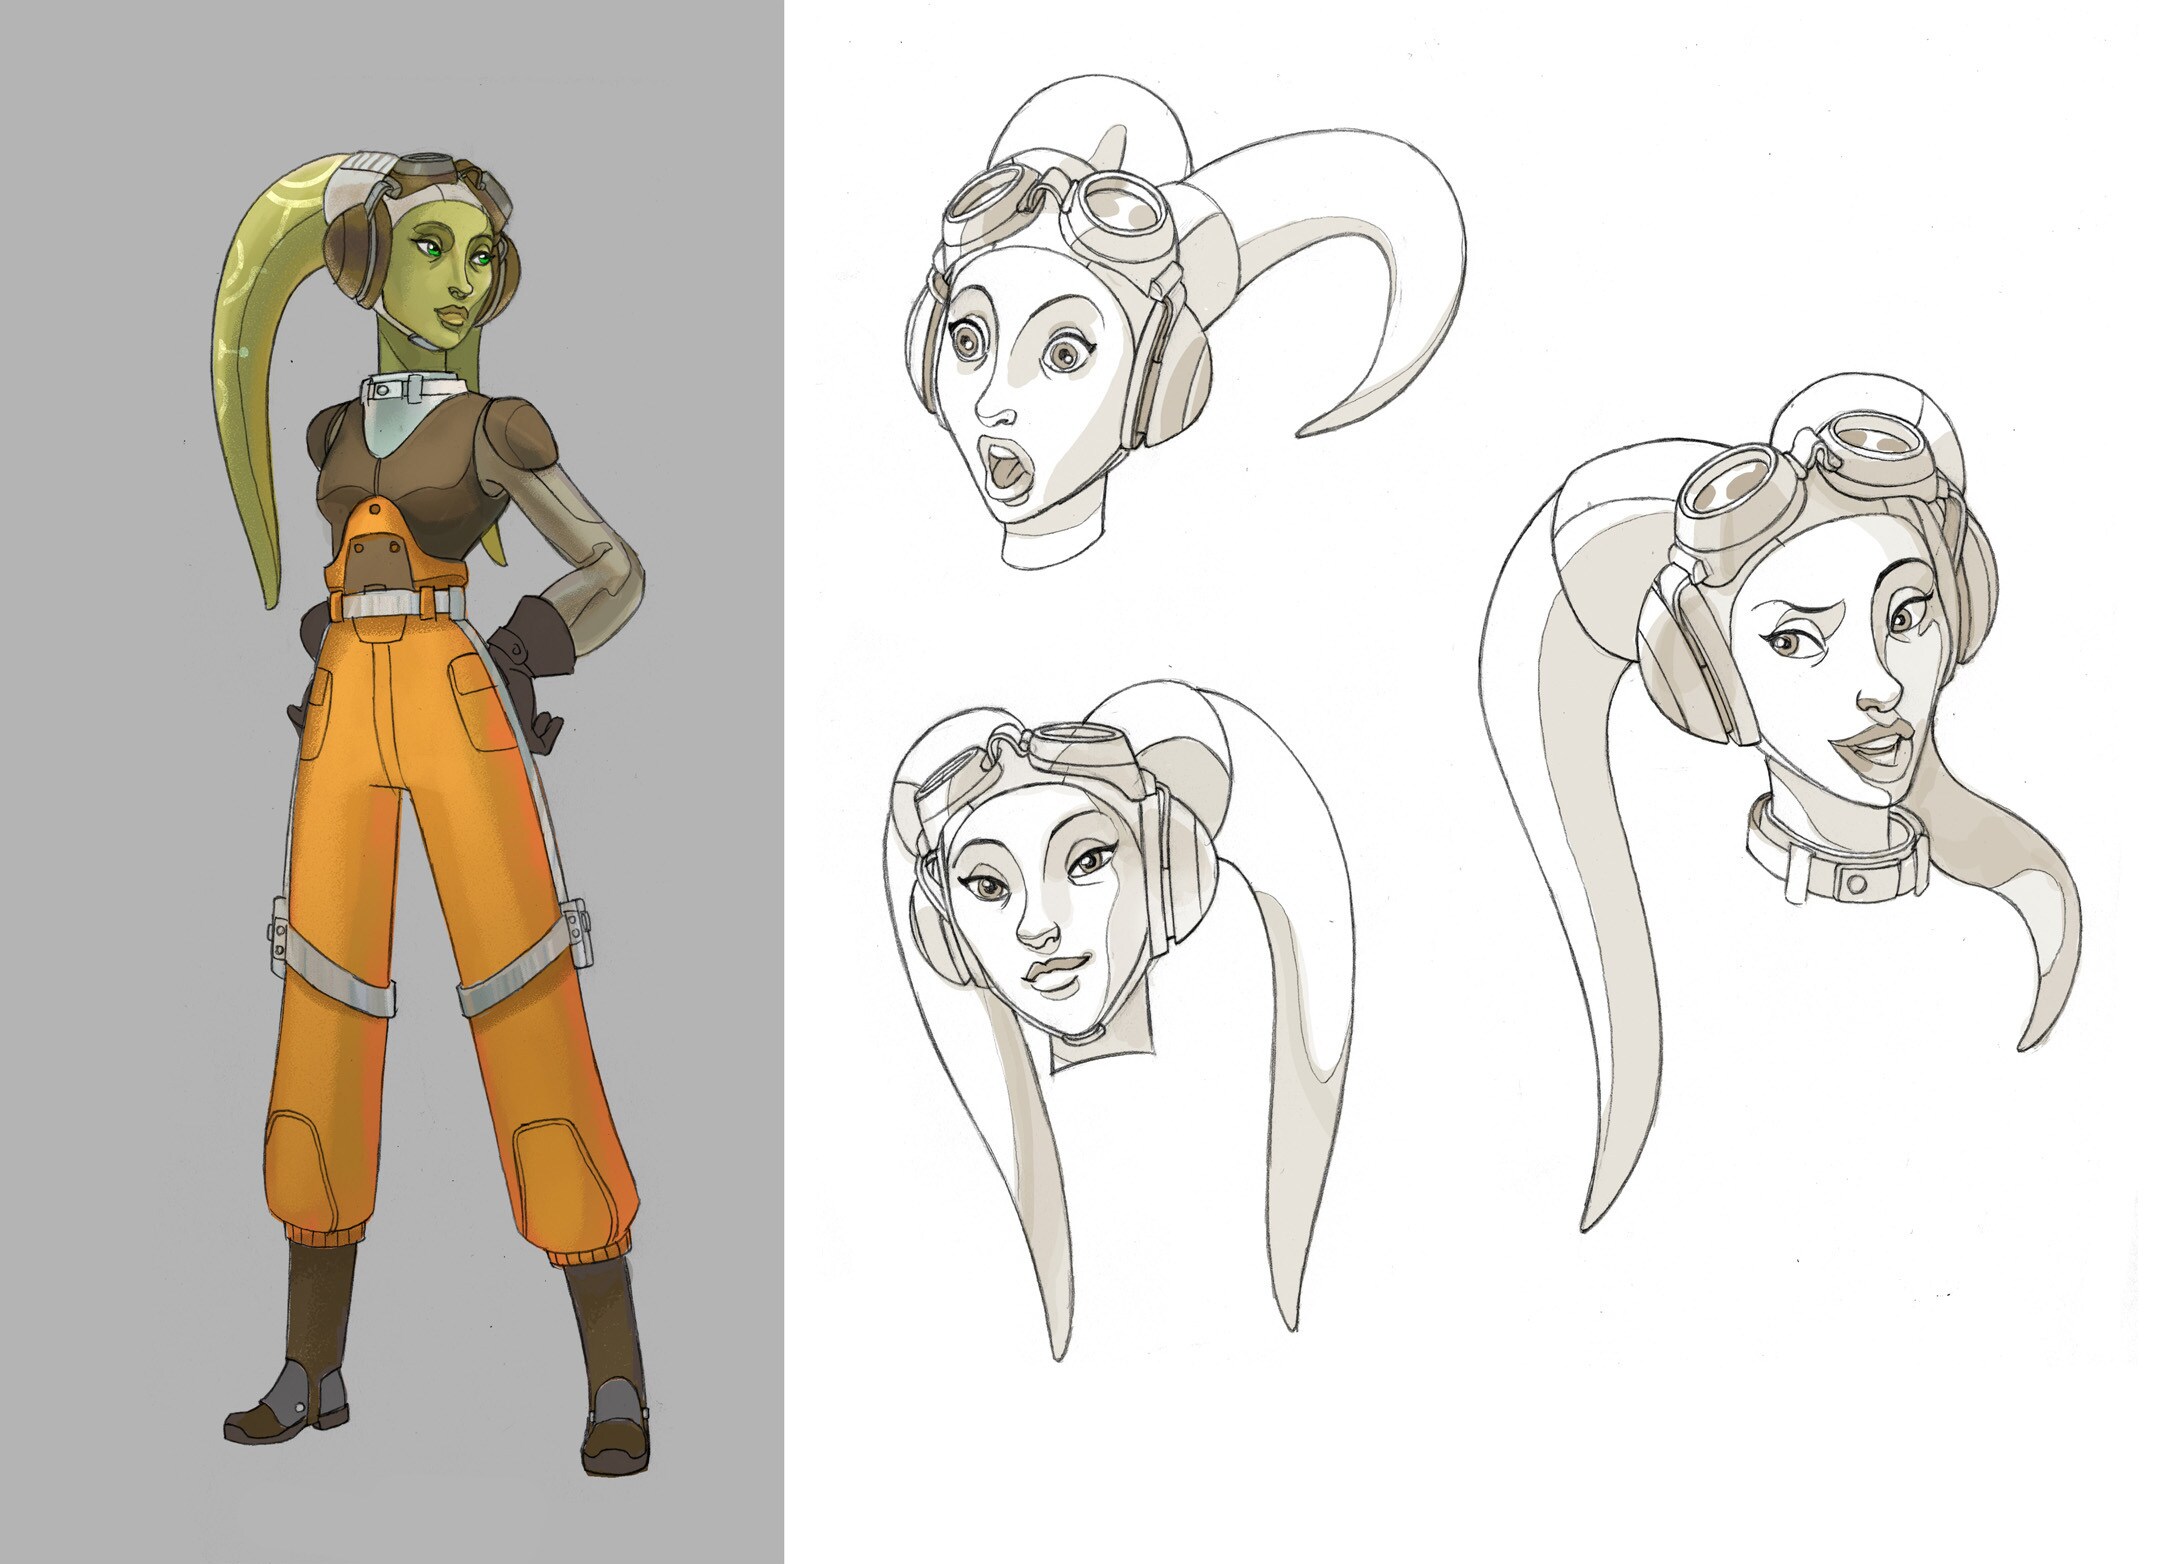 Hera Syndulla full character illustration and facial expression designs.